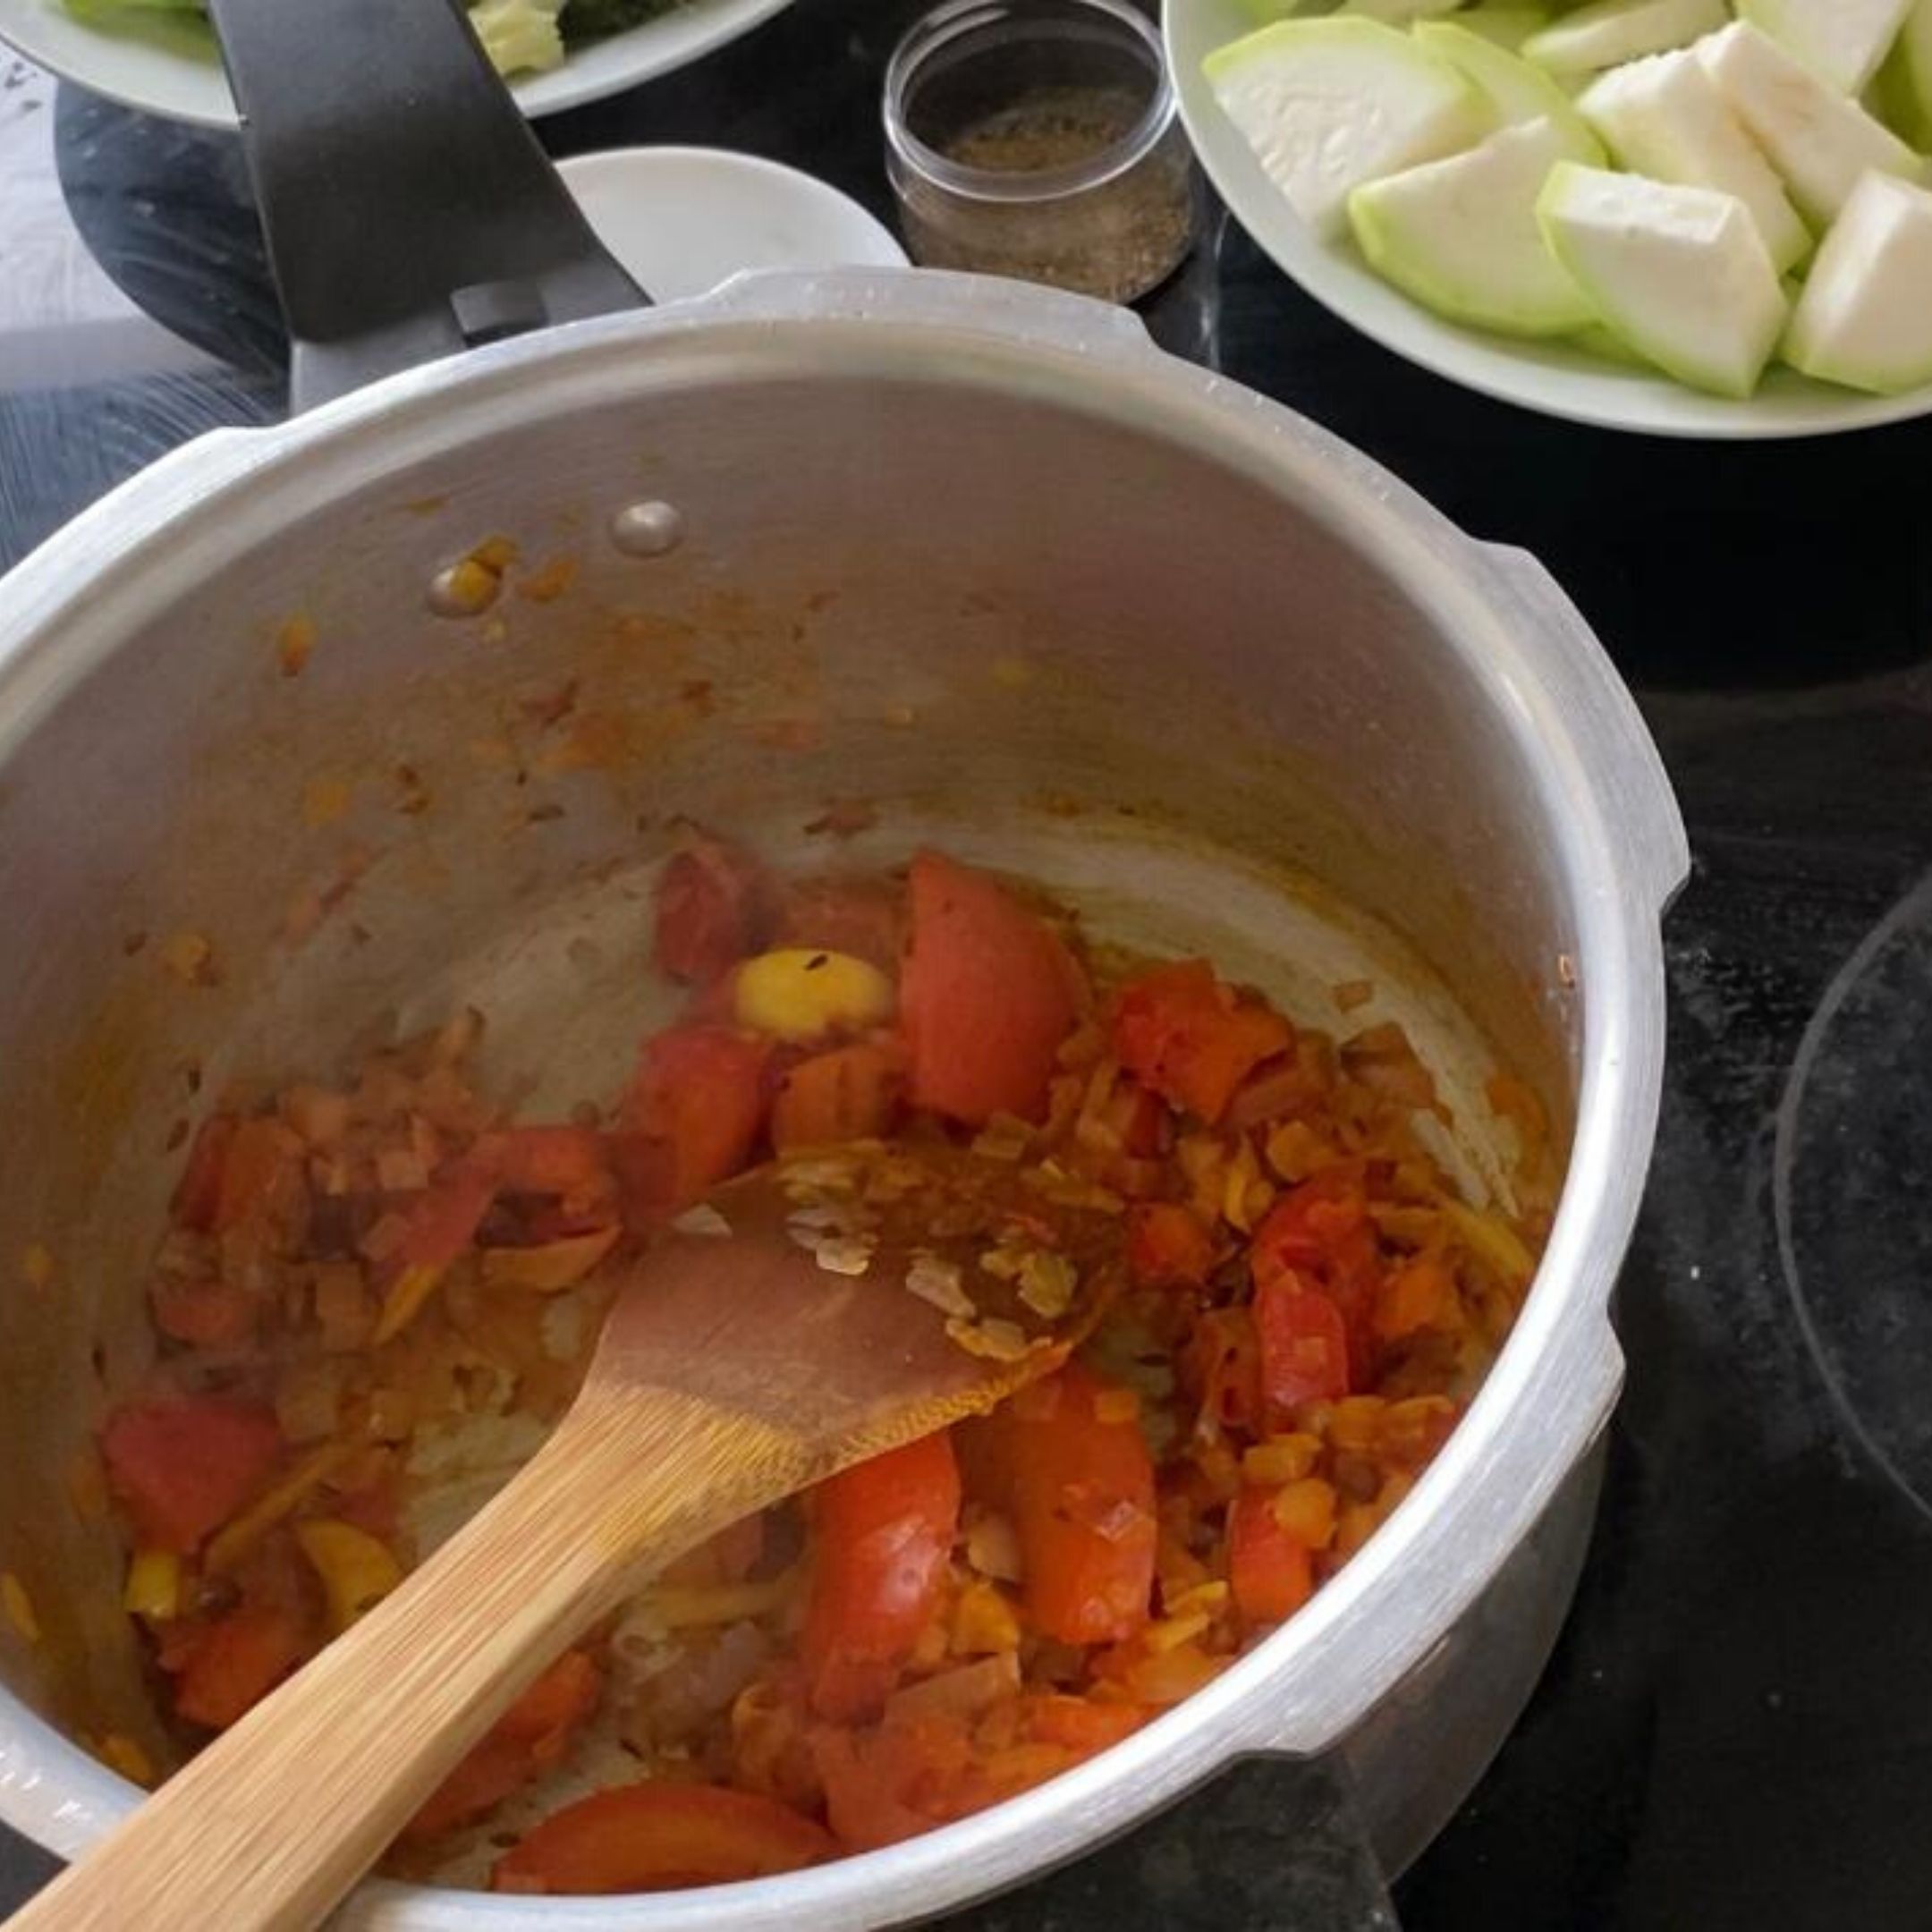 Ingredients-for-Vitamin-C-soup-Tomatoes-Being Rubitah-family conversations here